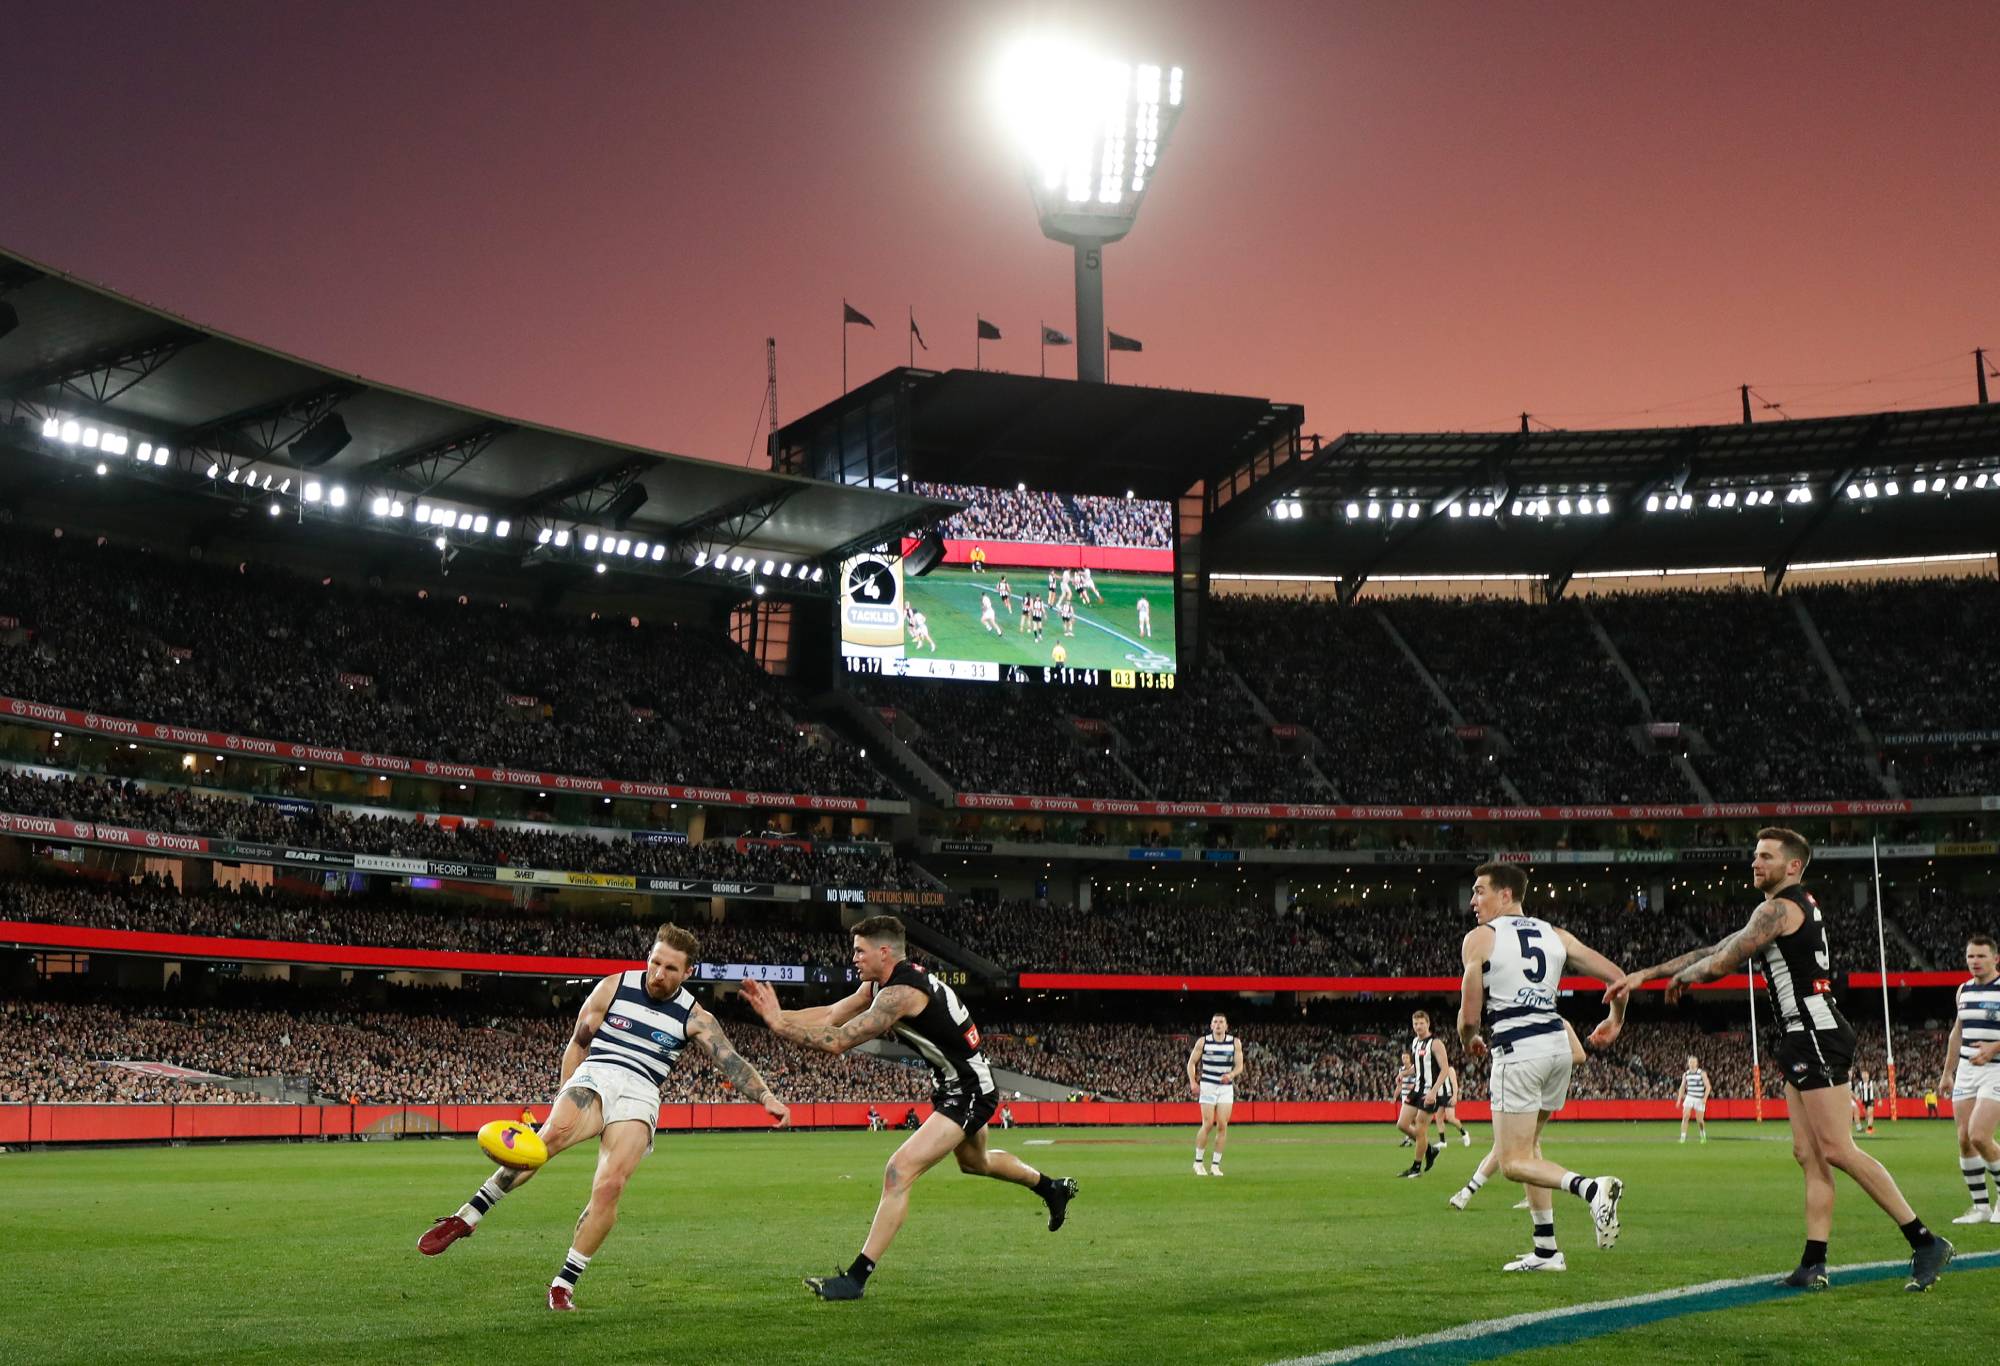 MELBOURNE, AUSTRALIA - SEPTEMBER 03: A general view during the 2022 AFL First Qualifying Final match between the Geelong Cats and the Collingwood Magpies at the Melbourne Cricket Ground on September 3, 2022 in Melbourne, Australia. (Photo by Michael Willson/AFL Photos via Getty Images)